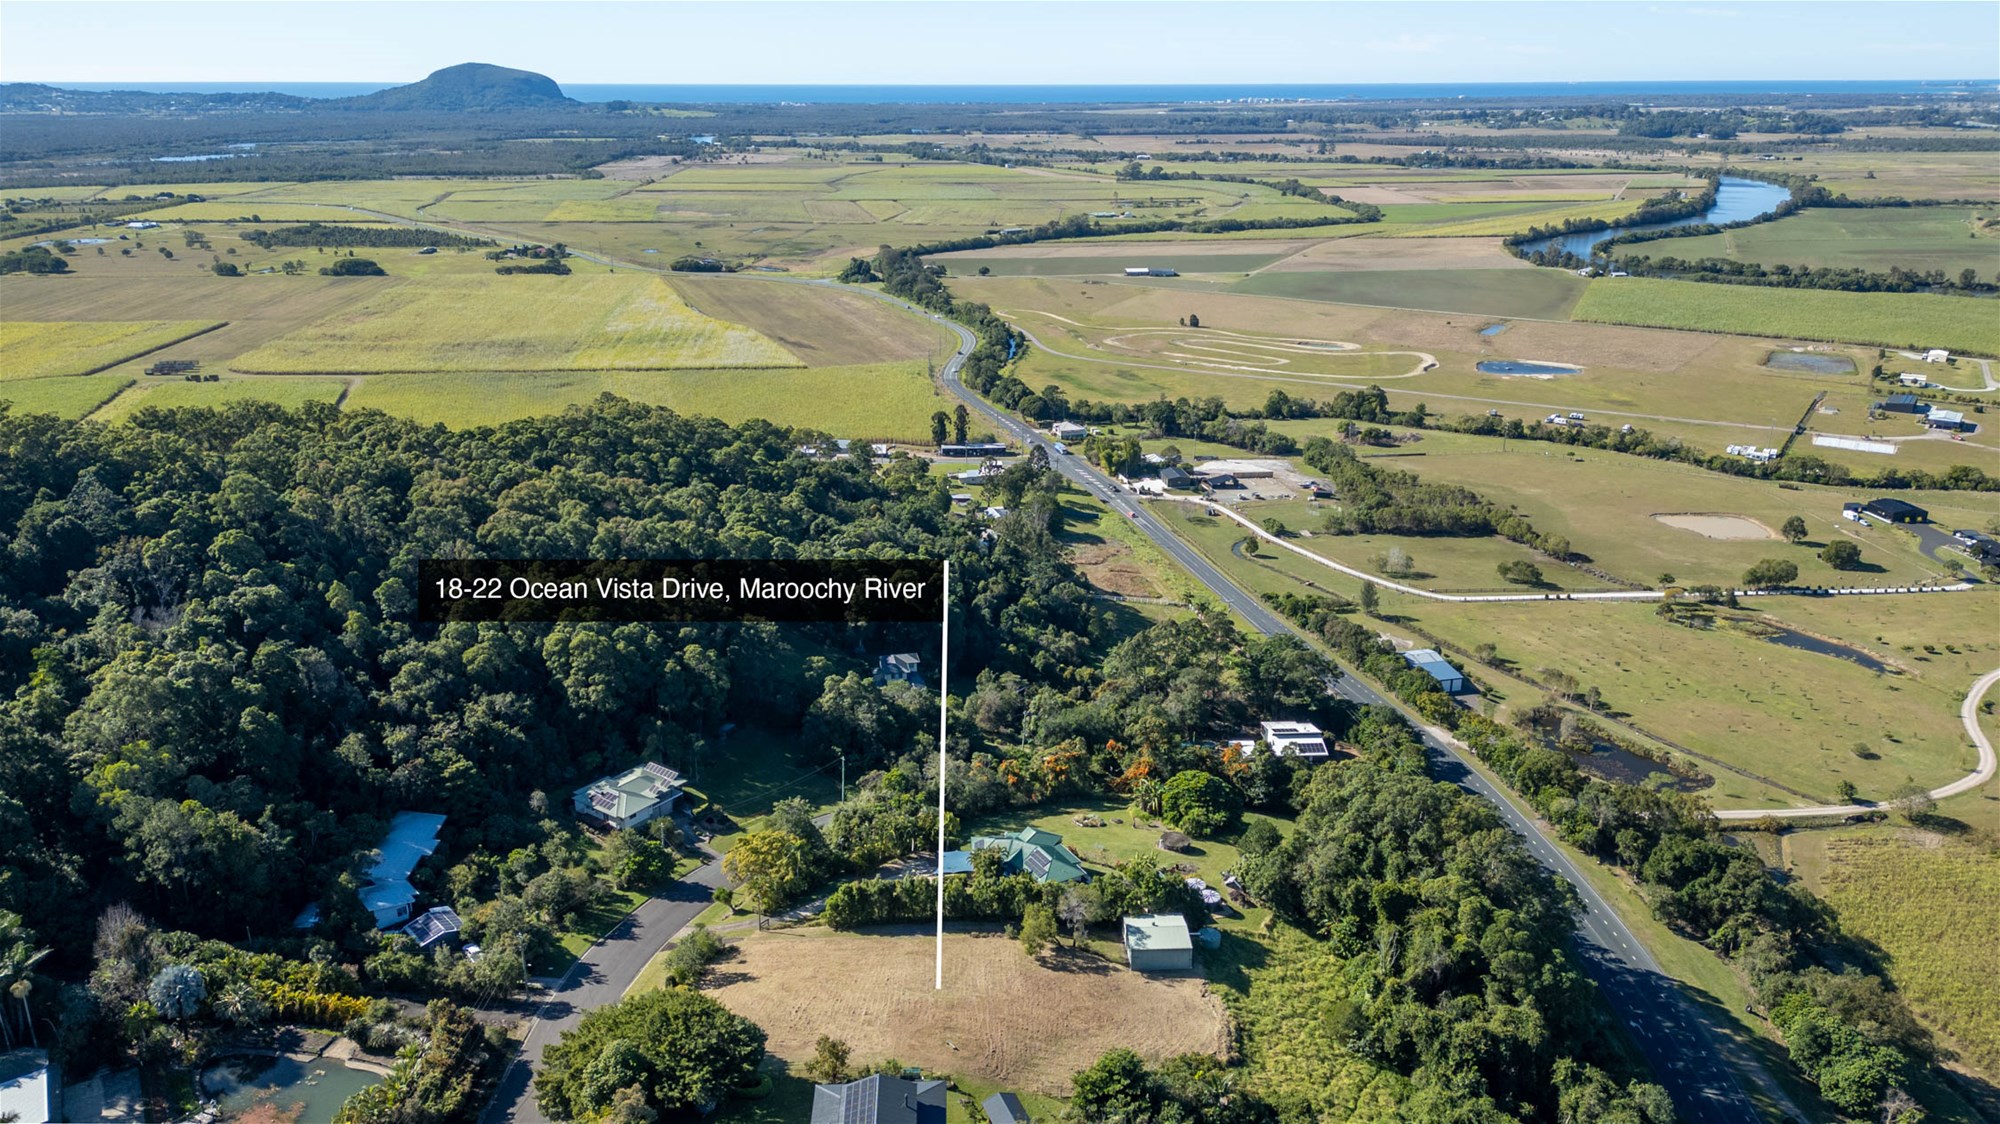 Major opportunity to secure rare acreage property with amazing views of Maroochy River Valley and Pacific Ocean